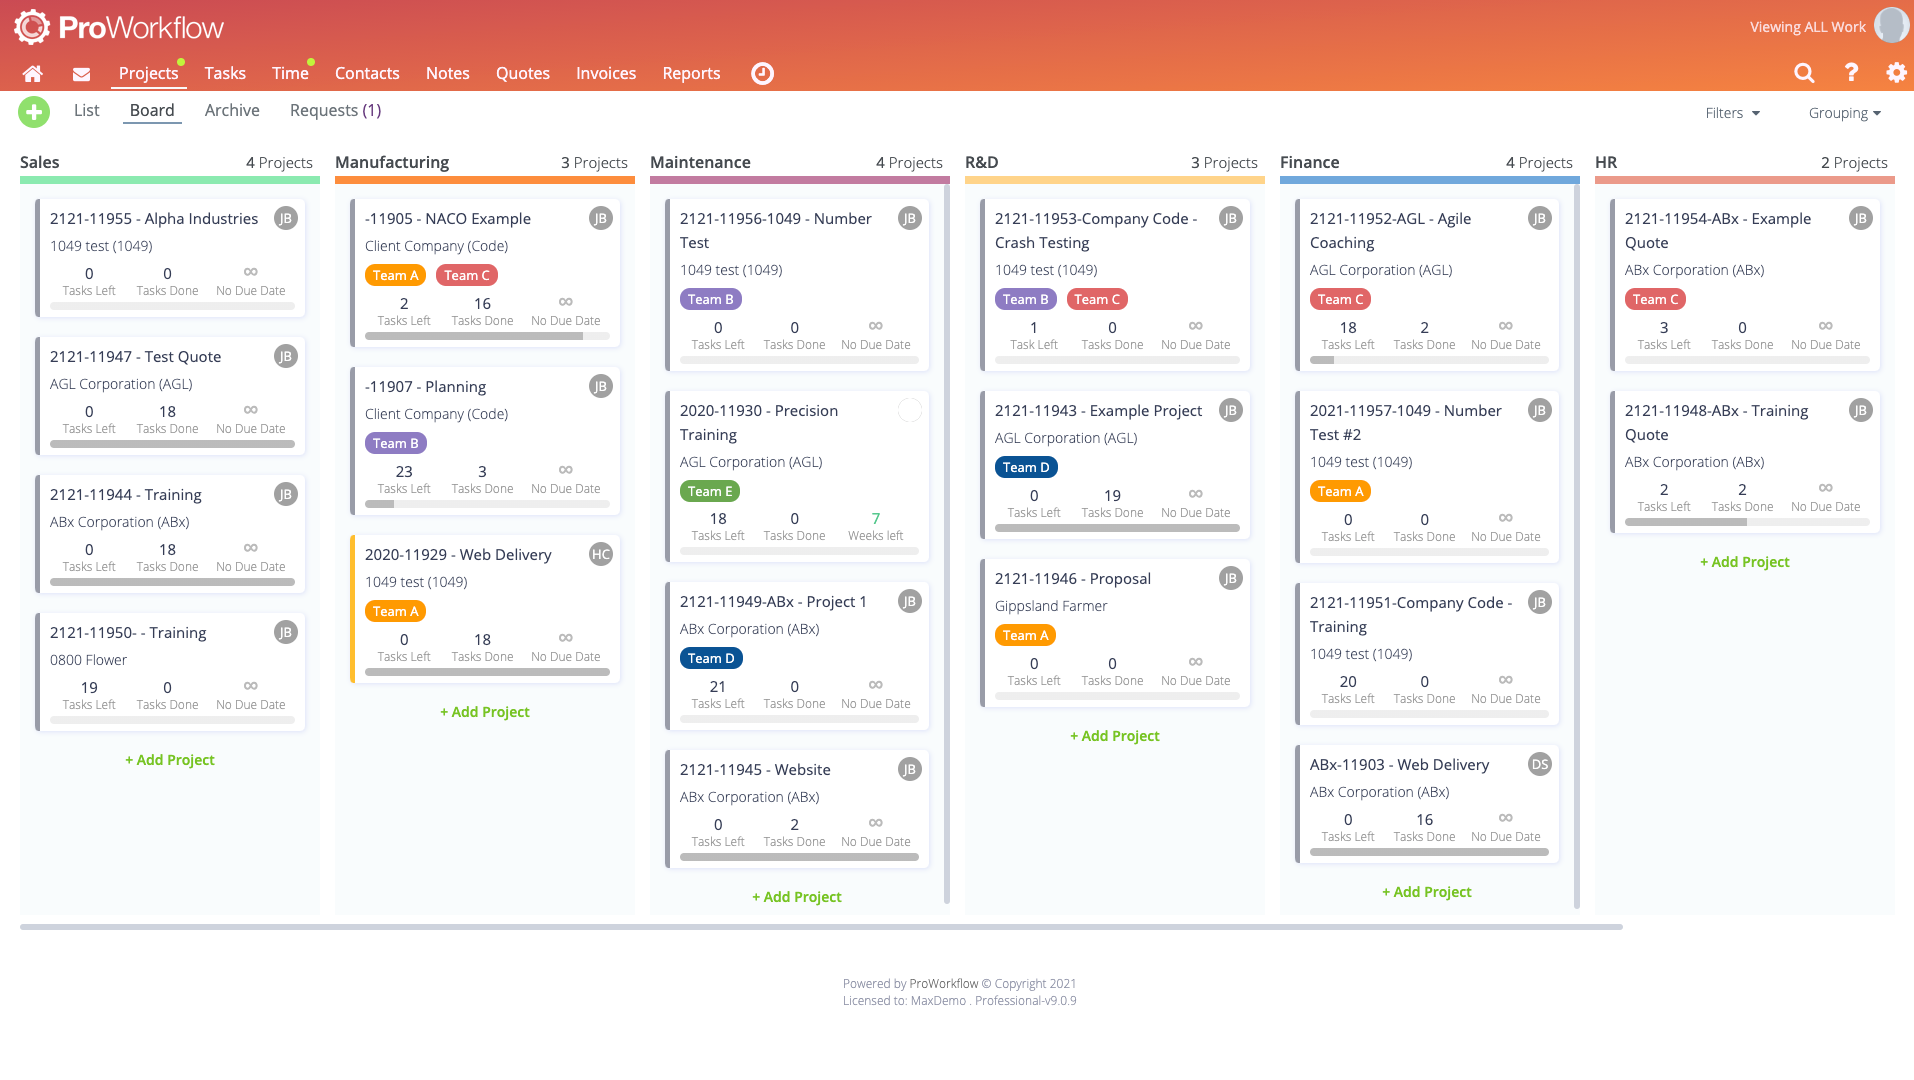 Kanban Board- agile project management tool designed to help visualize work, limit work-in-progress, and maximize efficiency 